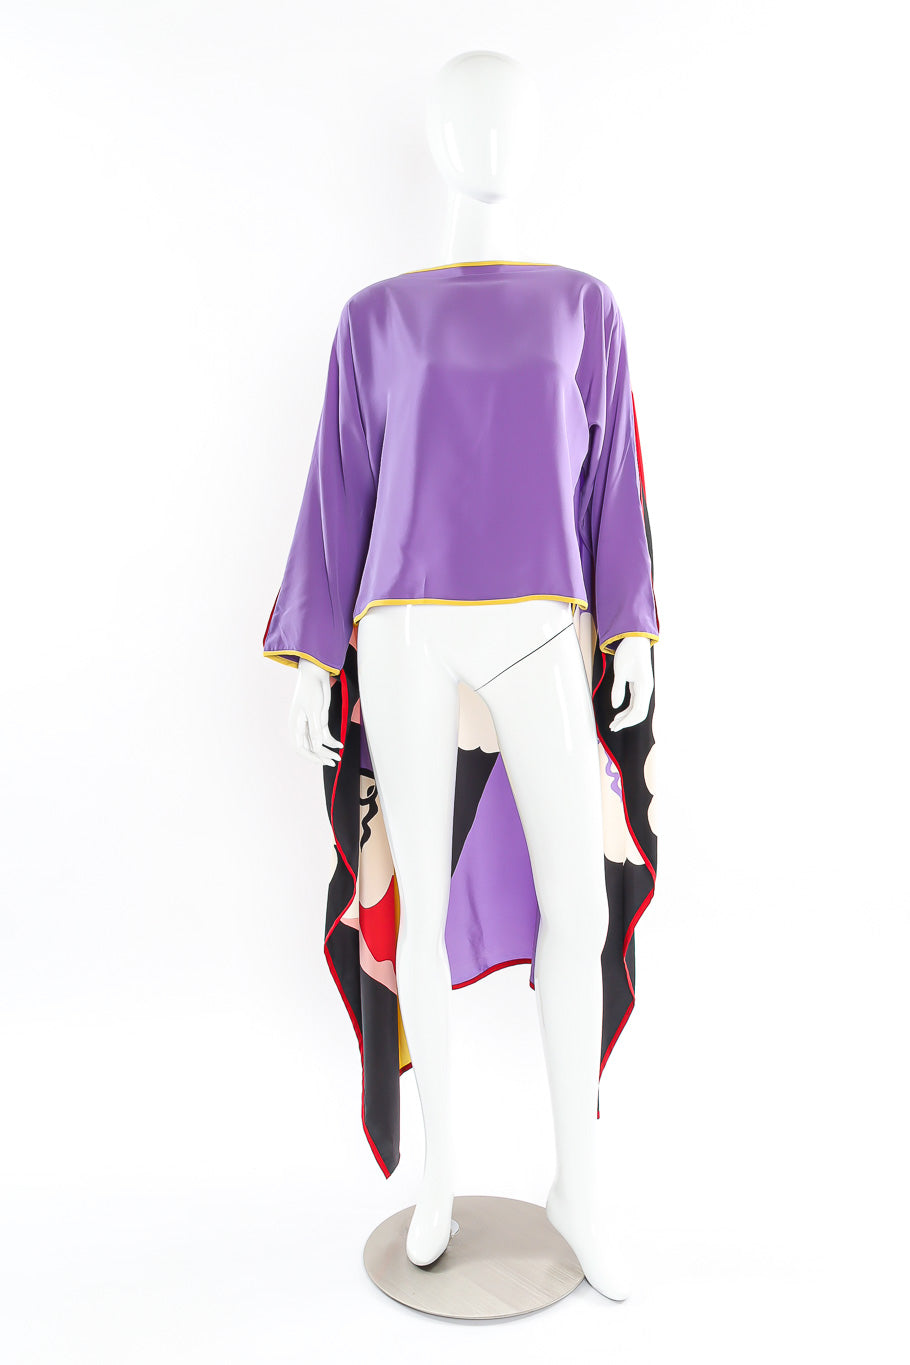 Whimsical blouse with cape attached by Michaele Vollbracht Front View @rcessla